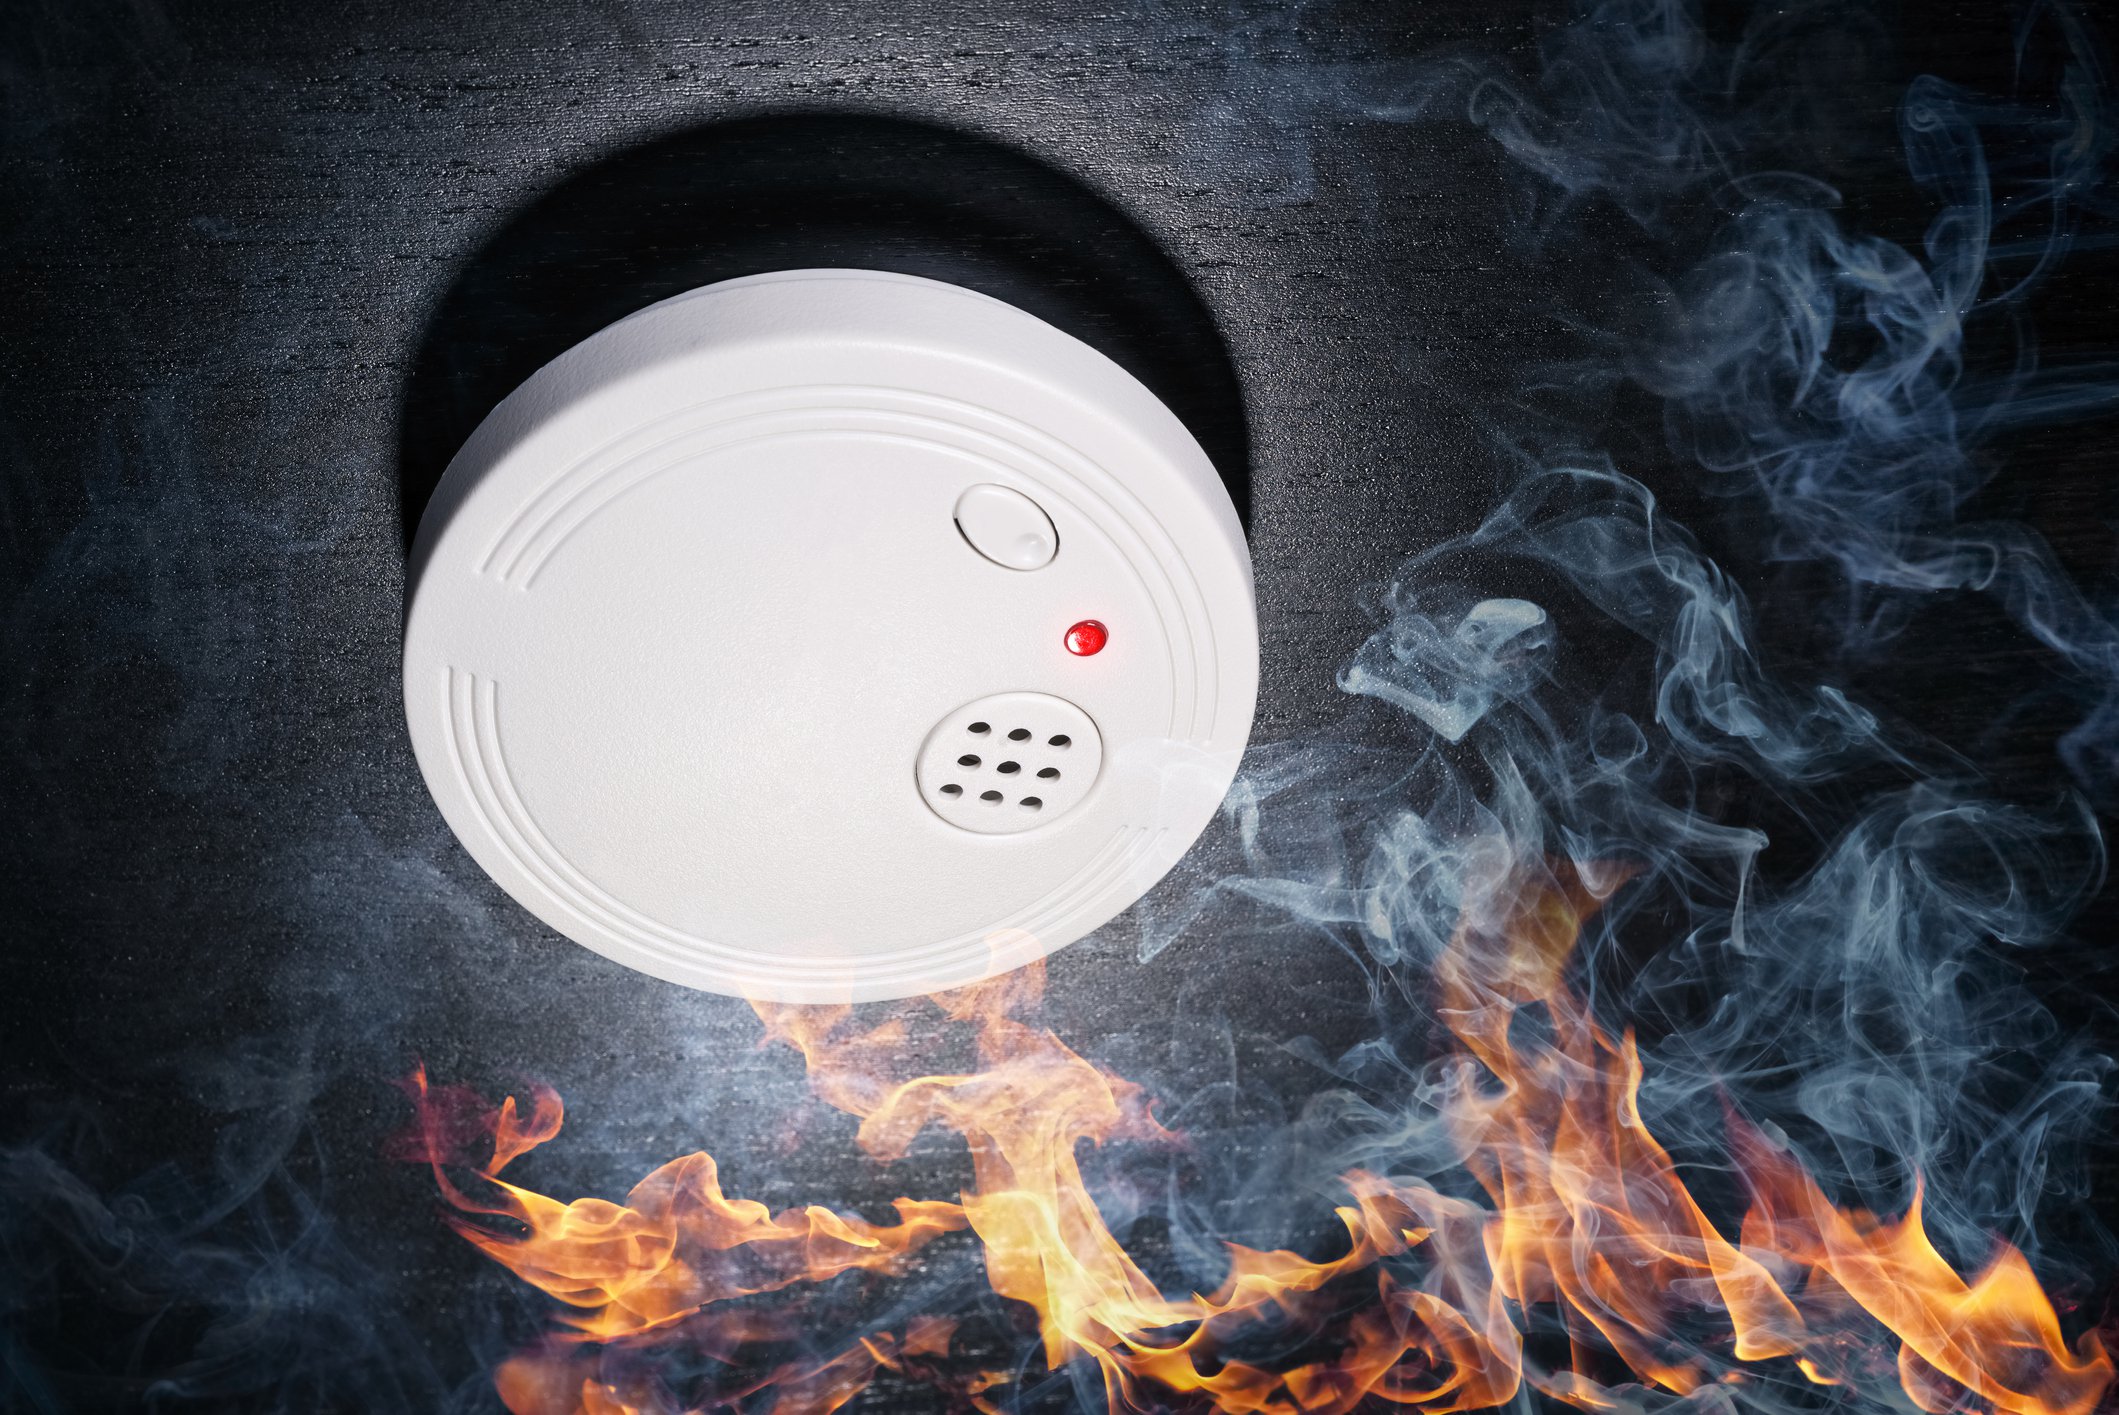 Special Fire Alarms Can Alert Individuals with Hearing Loss to